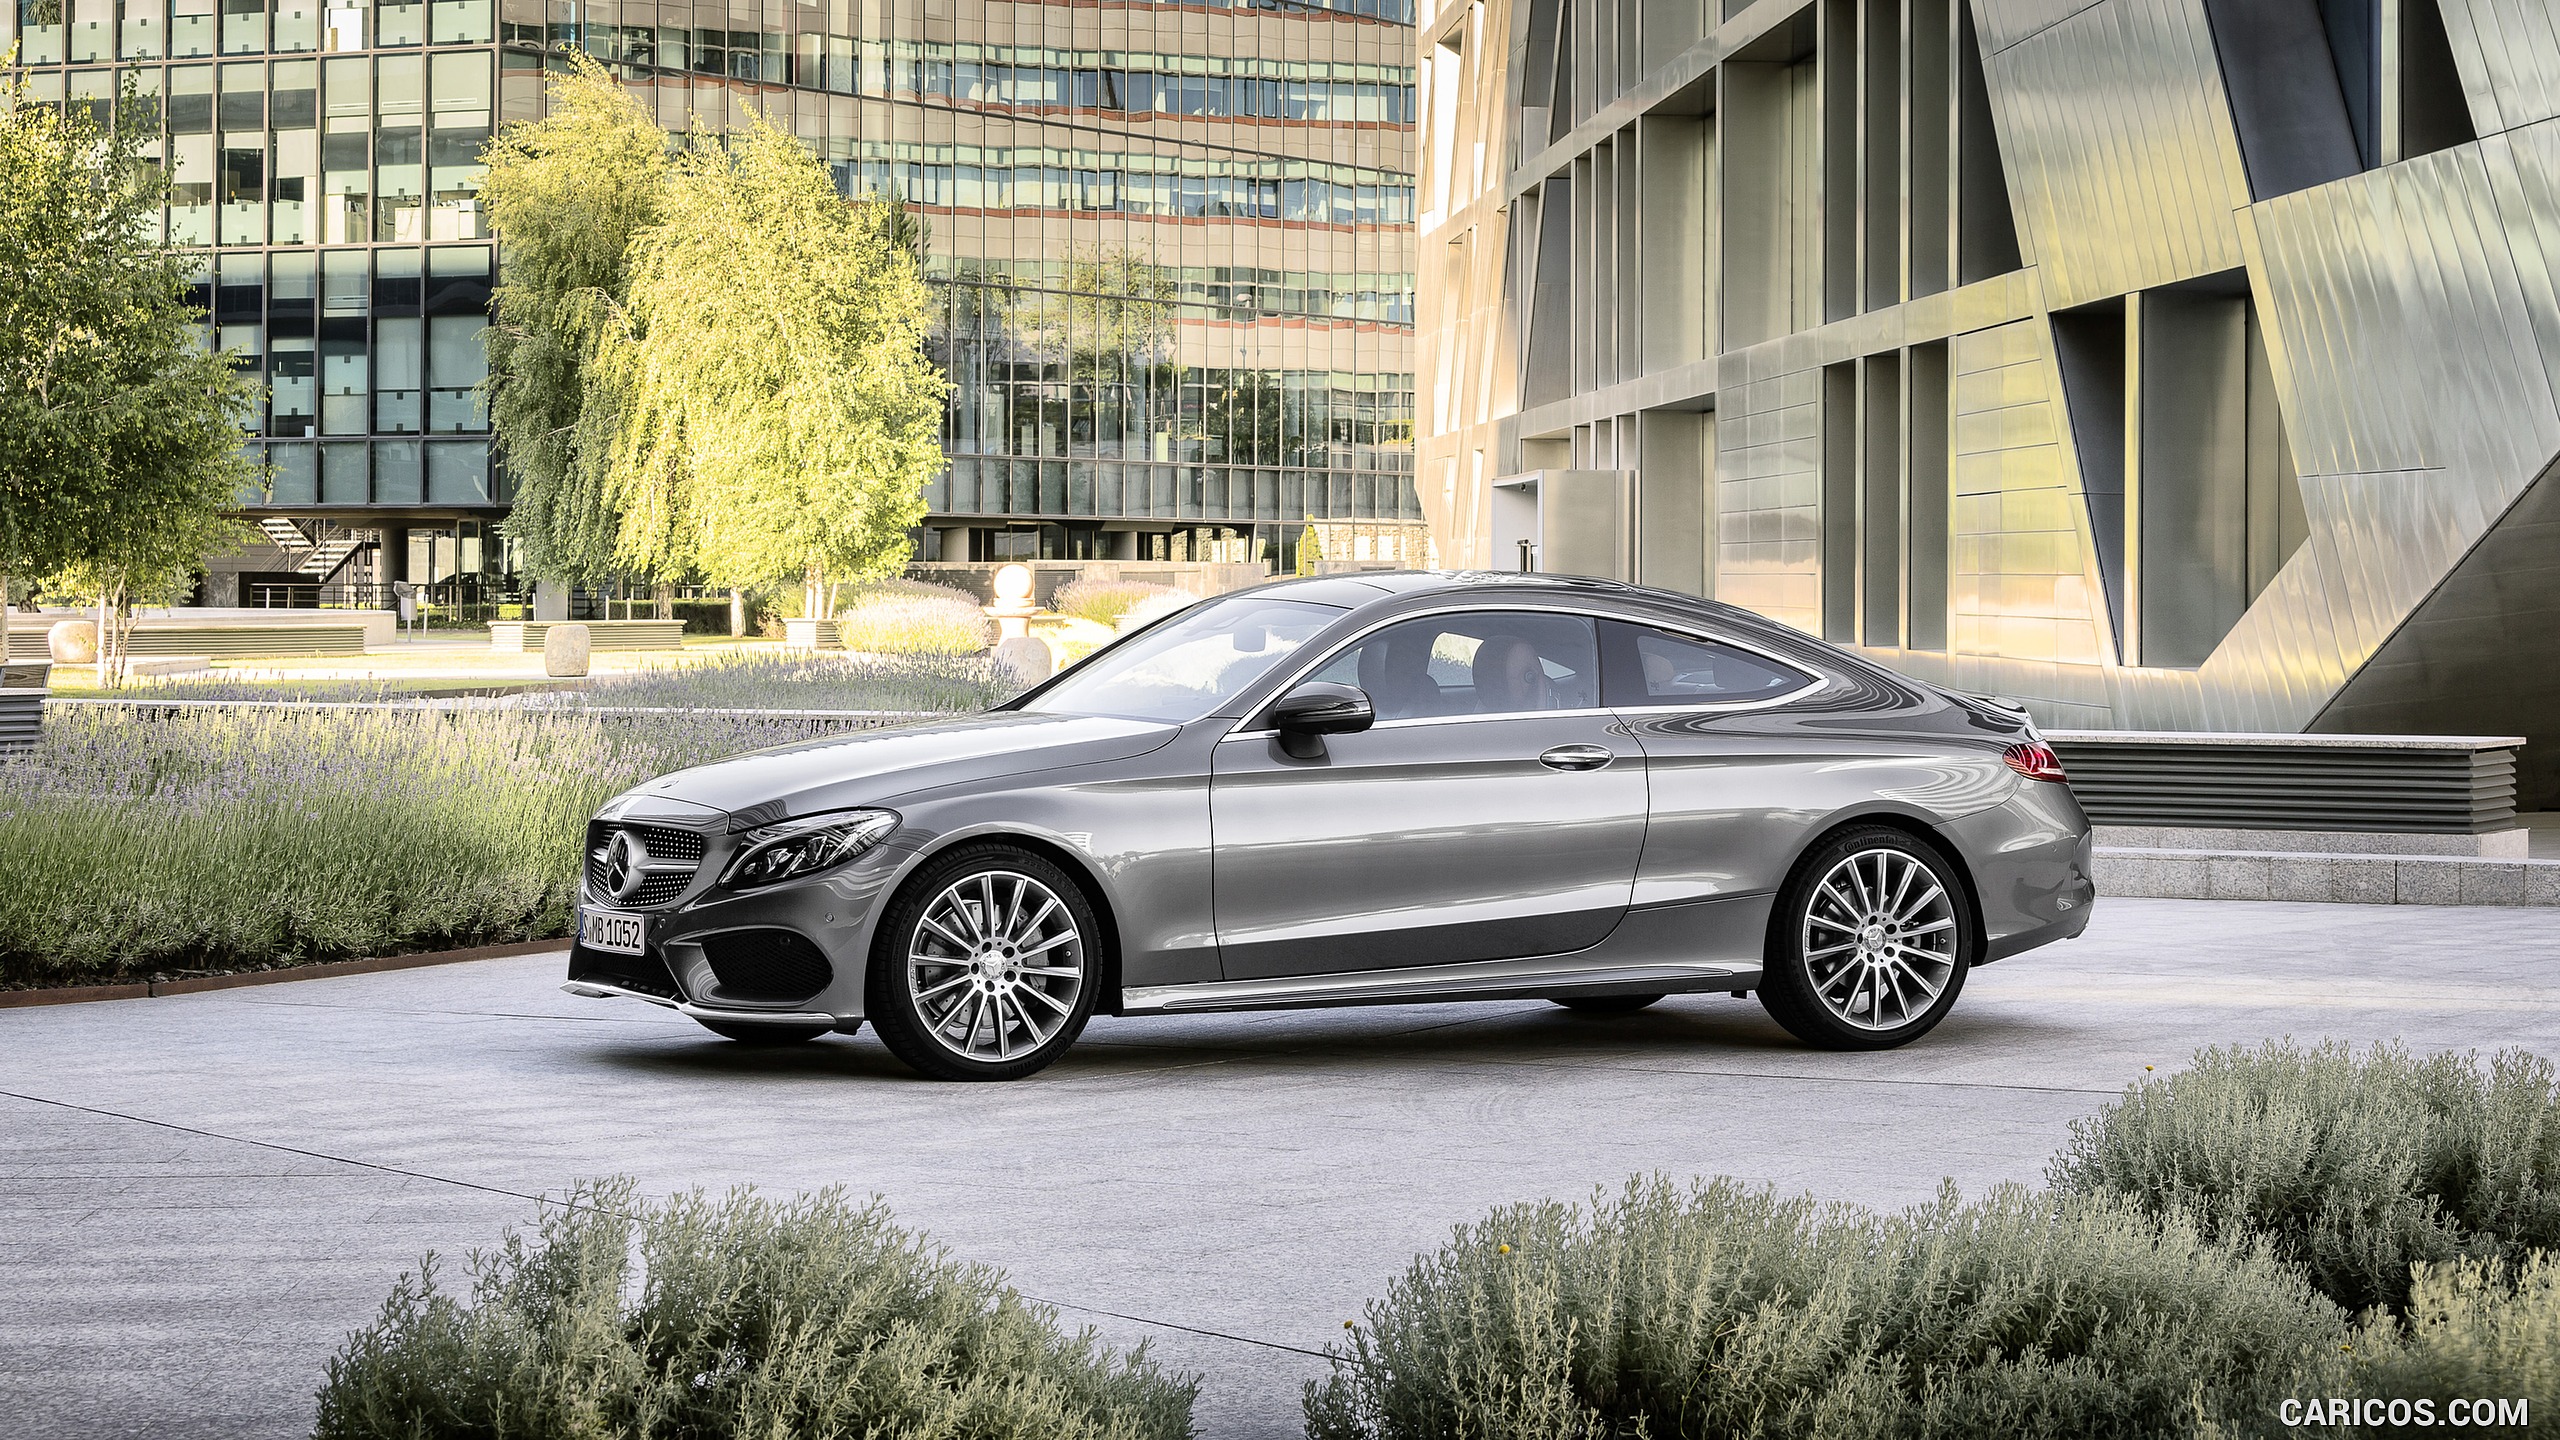 2017 Mercedes-Benz C-Class Coupe C300 (Selenit Grey) - Side, #53 of 210